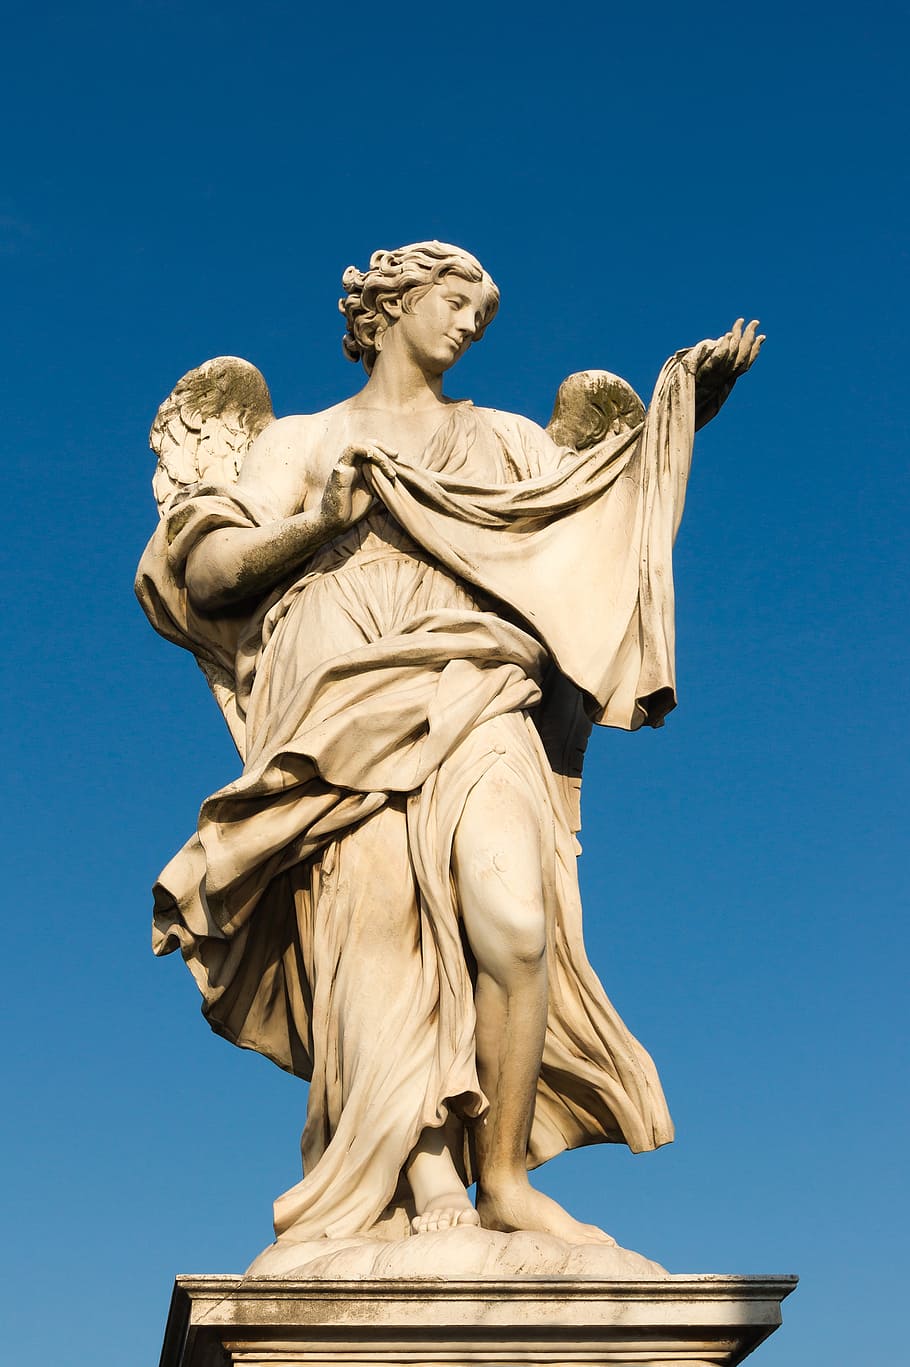 the angel with the veronica veil, sant'angelo bridge, rome, italy, sculpture, statue, figure, angel, historic, monument